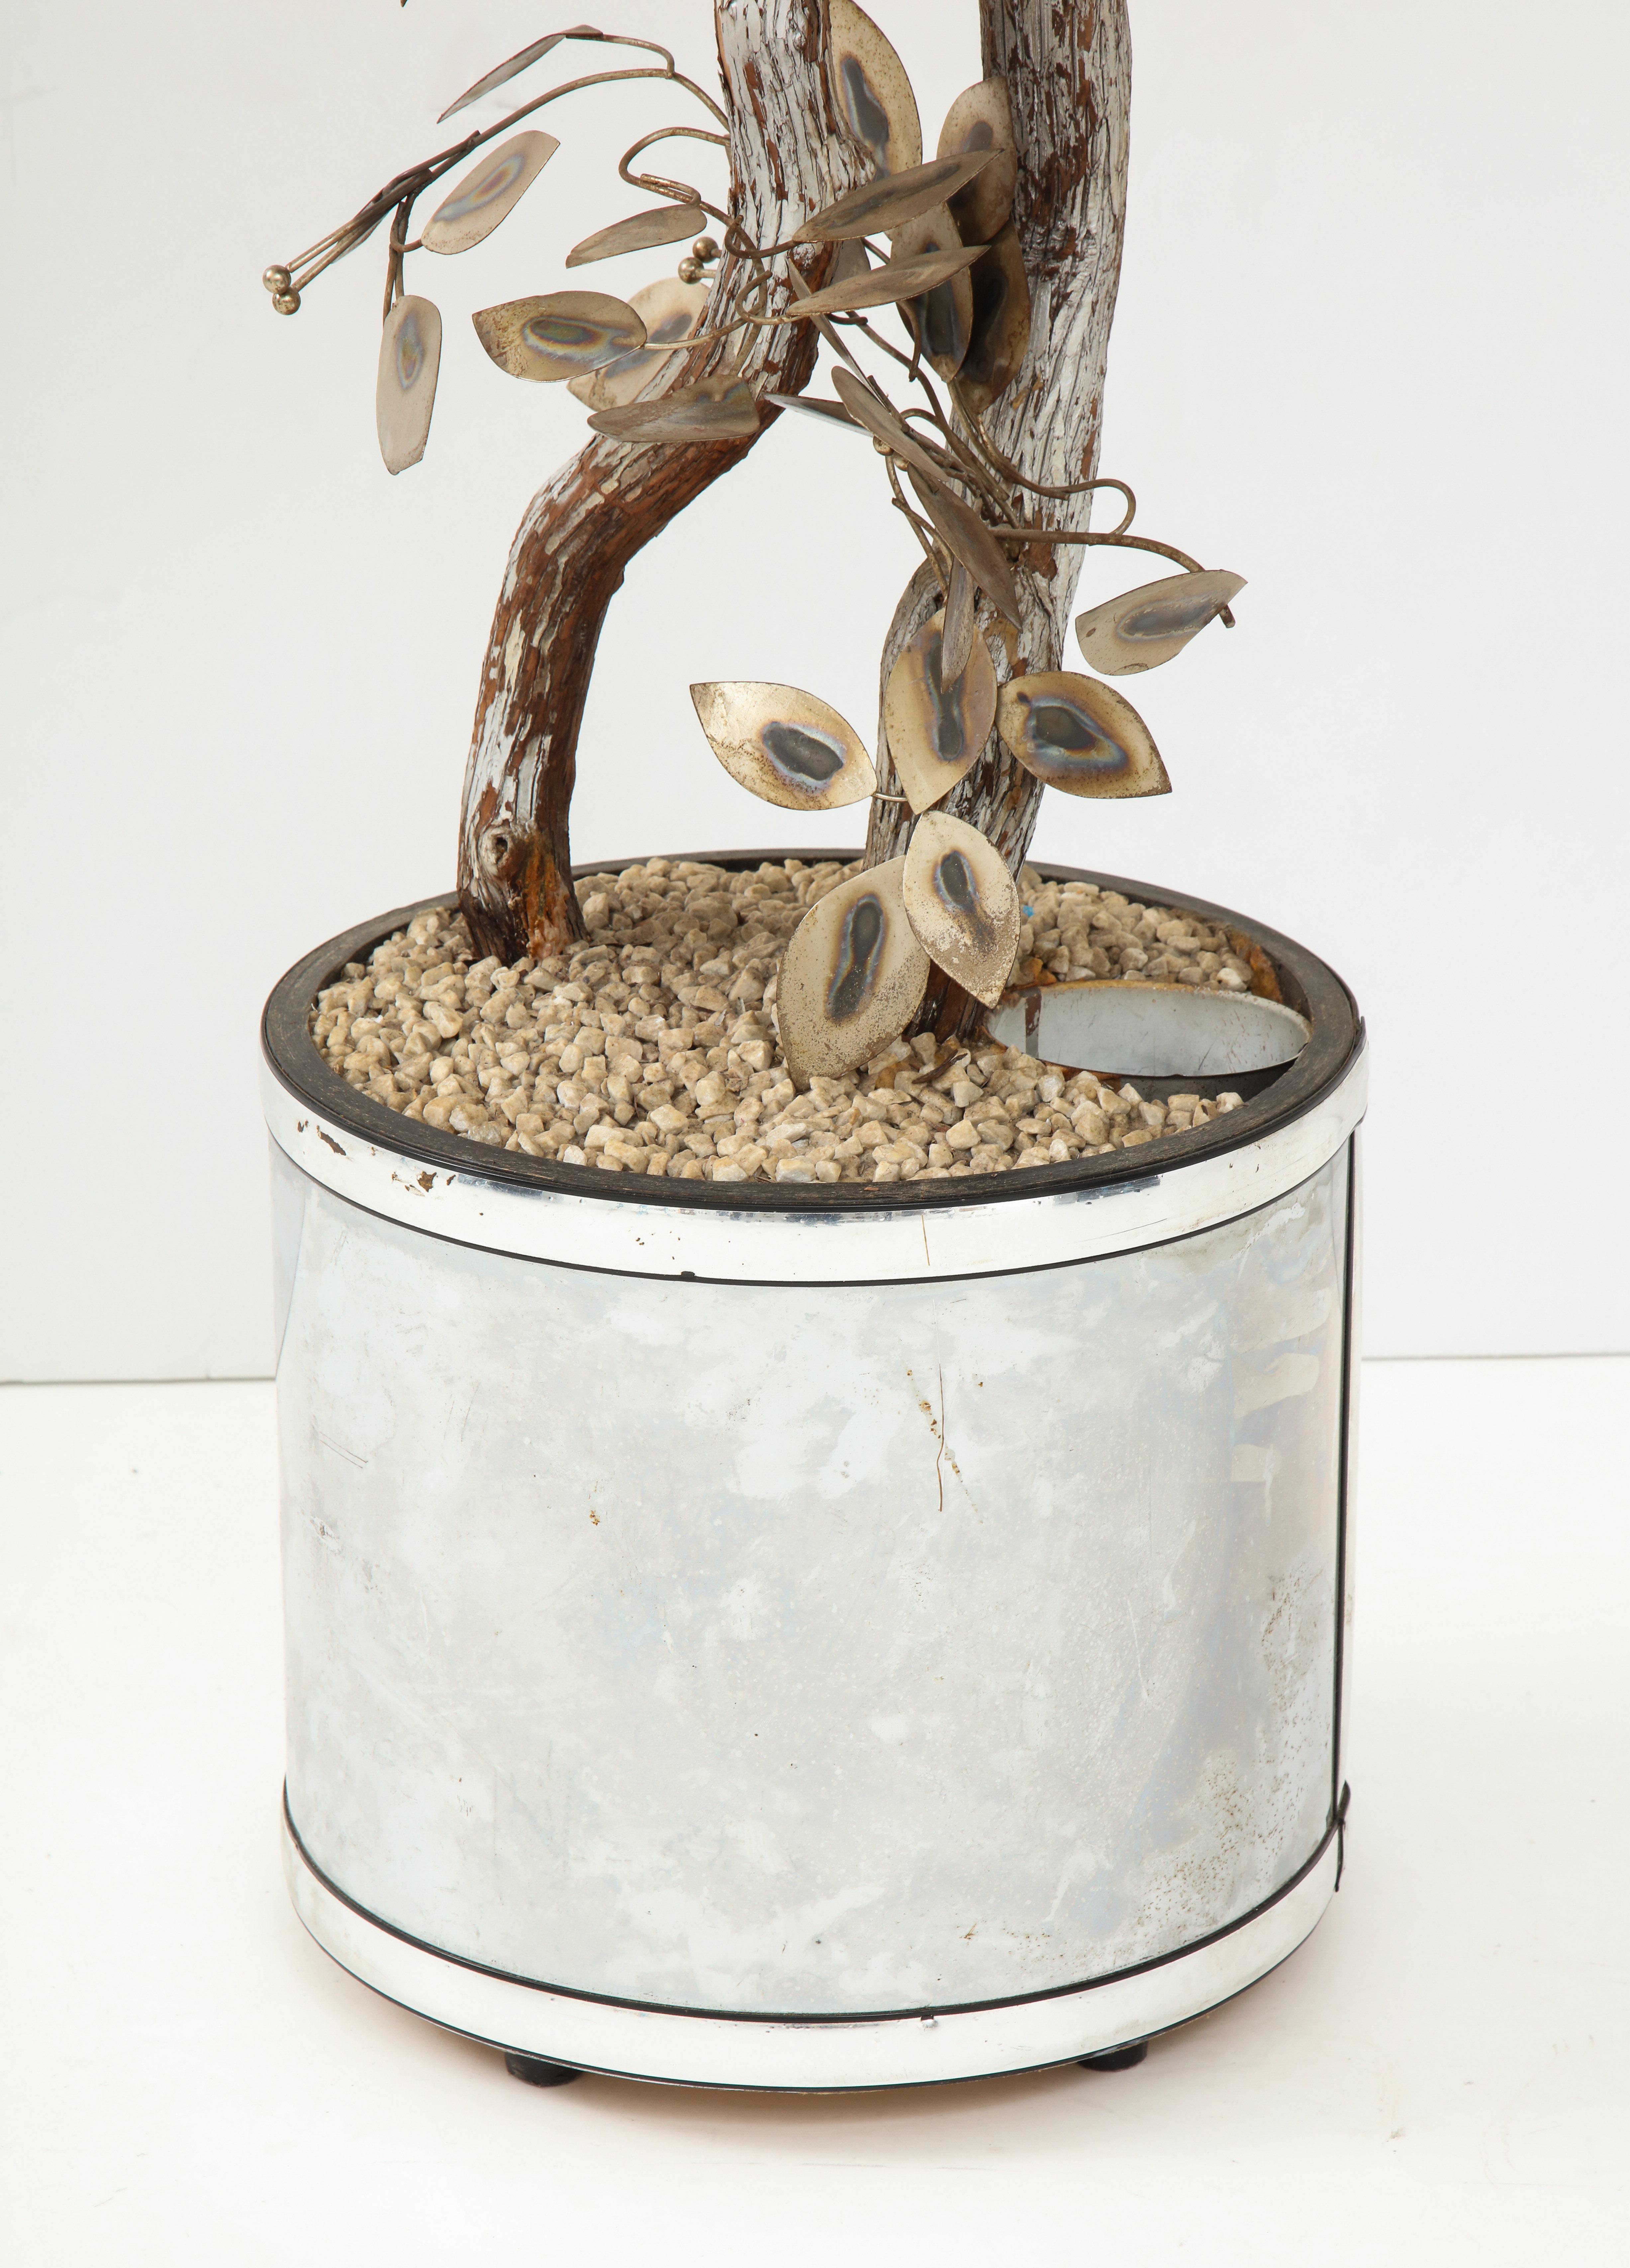 A great way to add dimension and whimsy to a room, this tree sculpture is a creation of Curtis Jeré. Standing six feet tall, the tree consists of silvered leaves on a silver painted tree branch in a silver planter. The tree is illuminated which adds